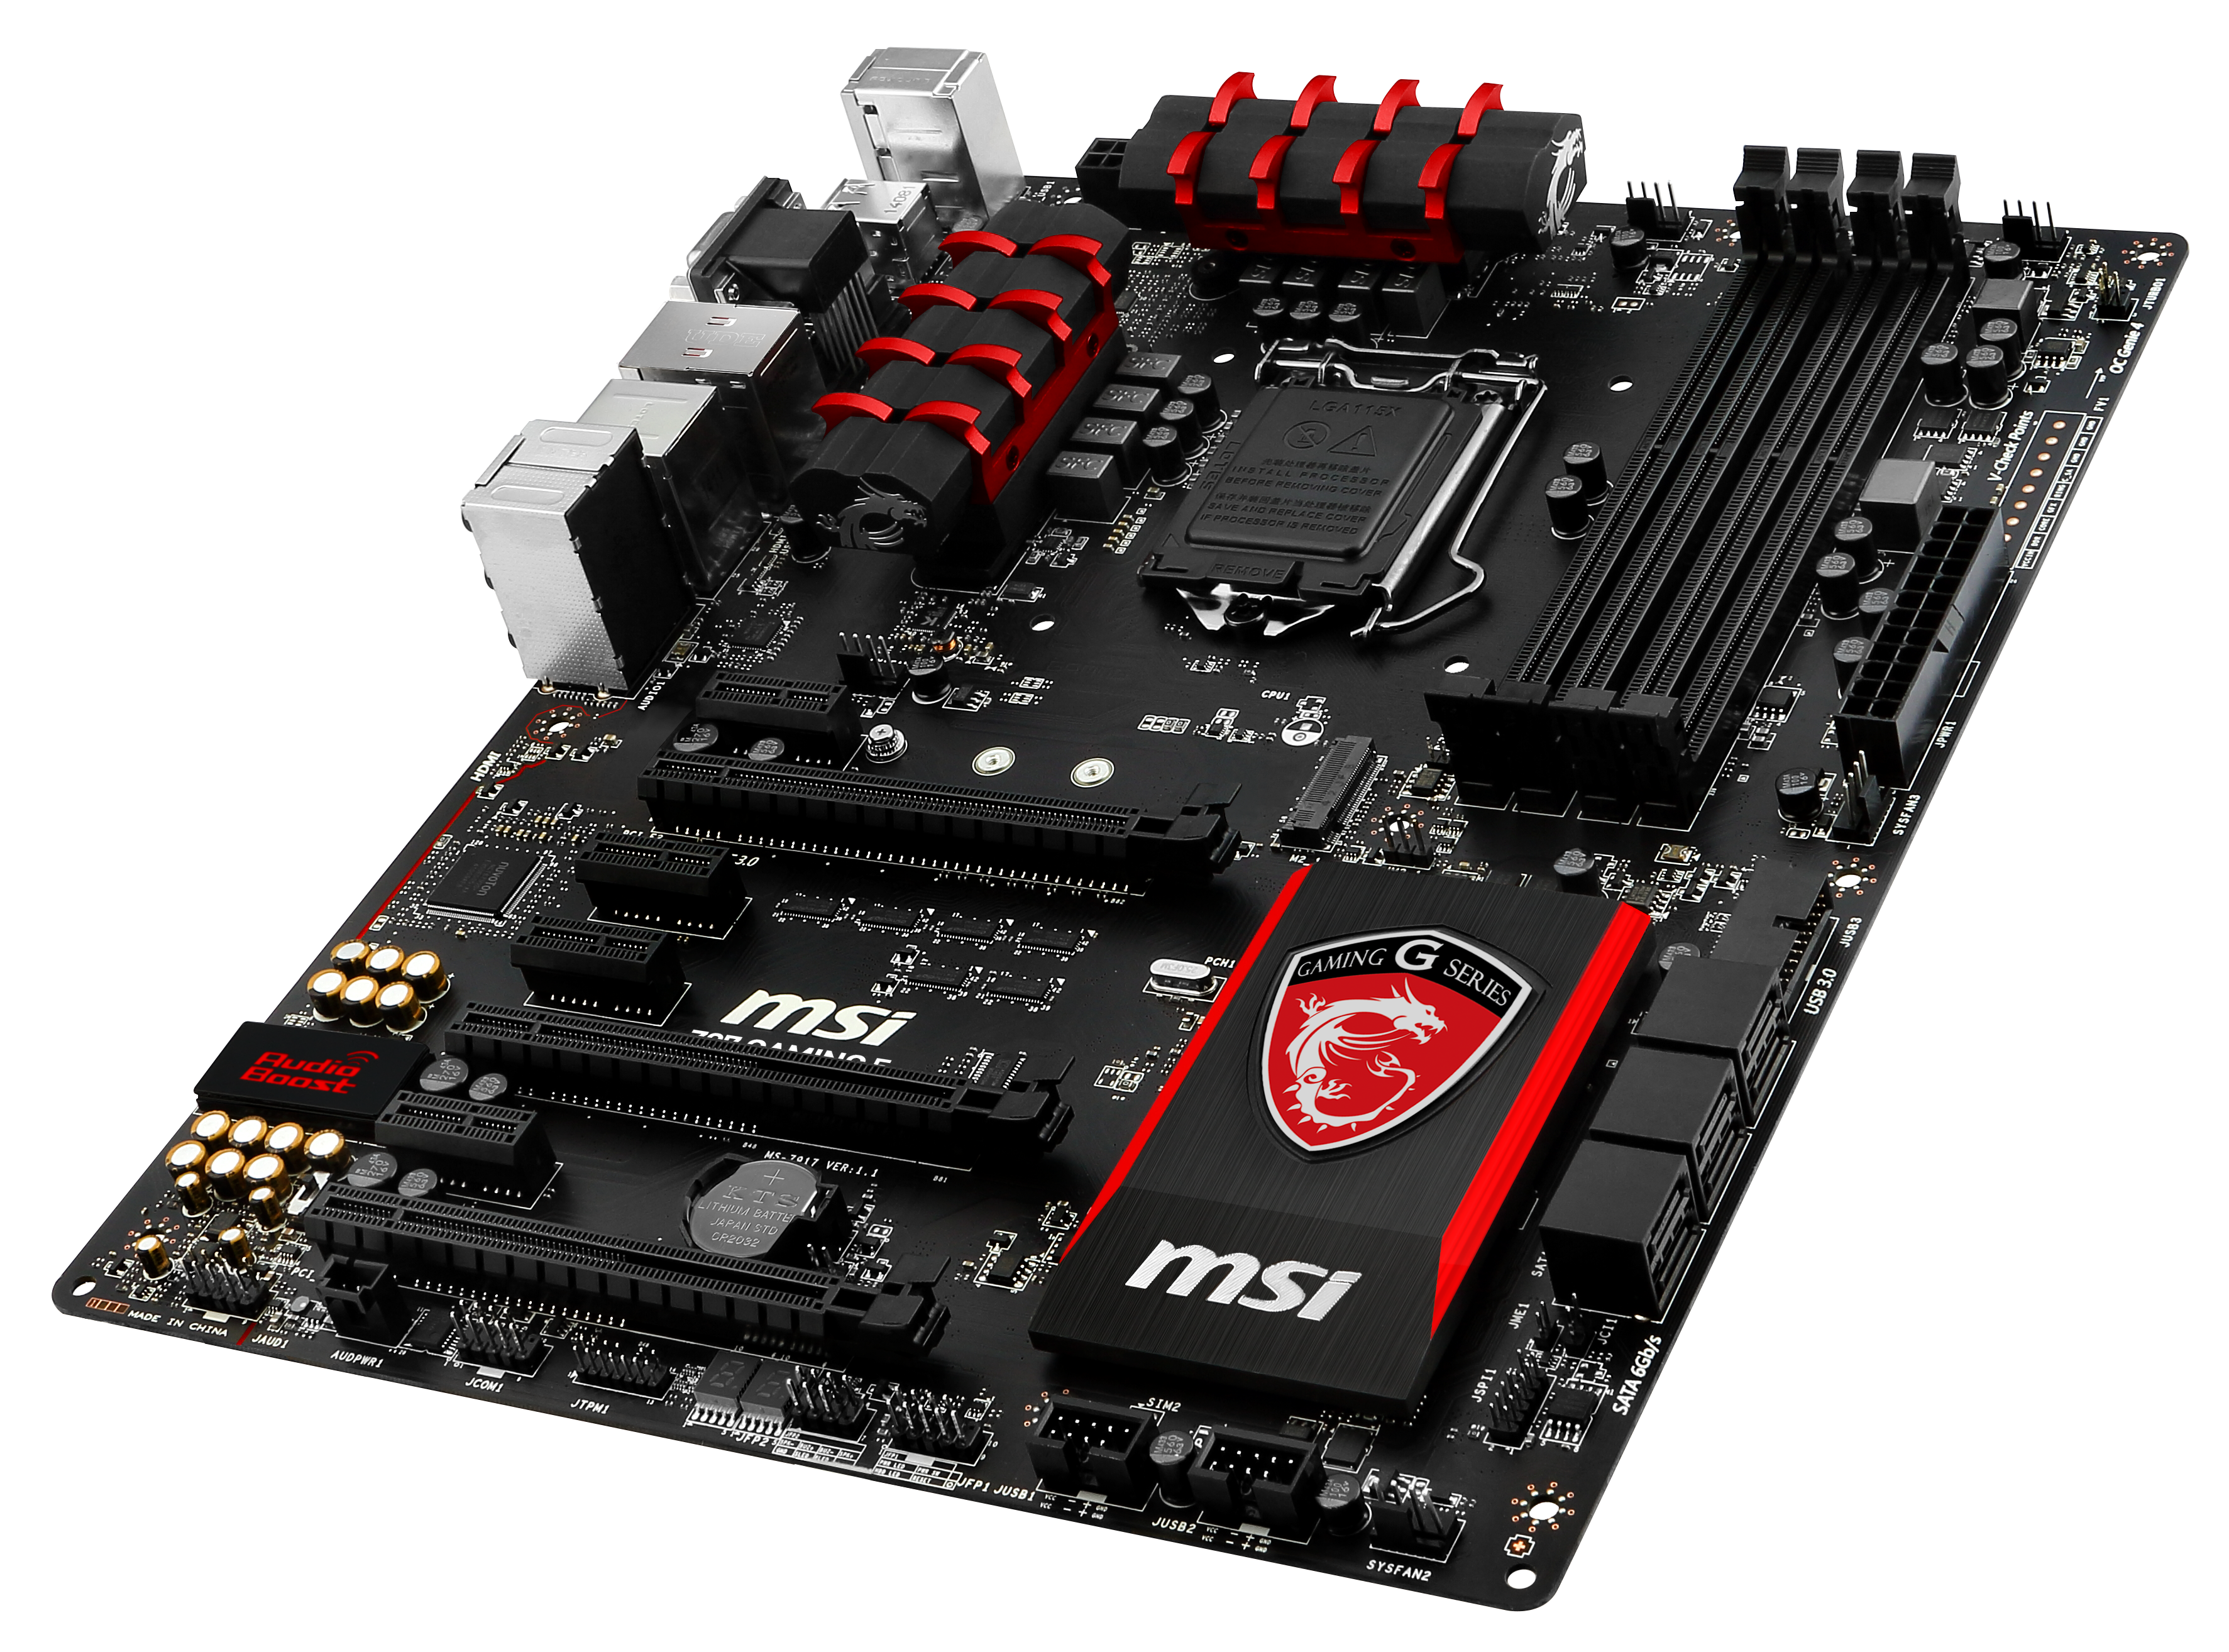 msi z97 gaming 7 no front side audio